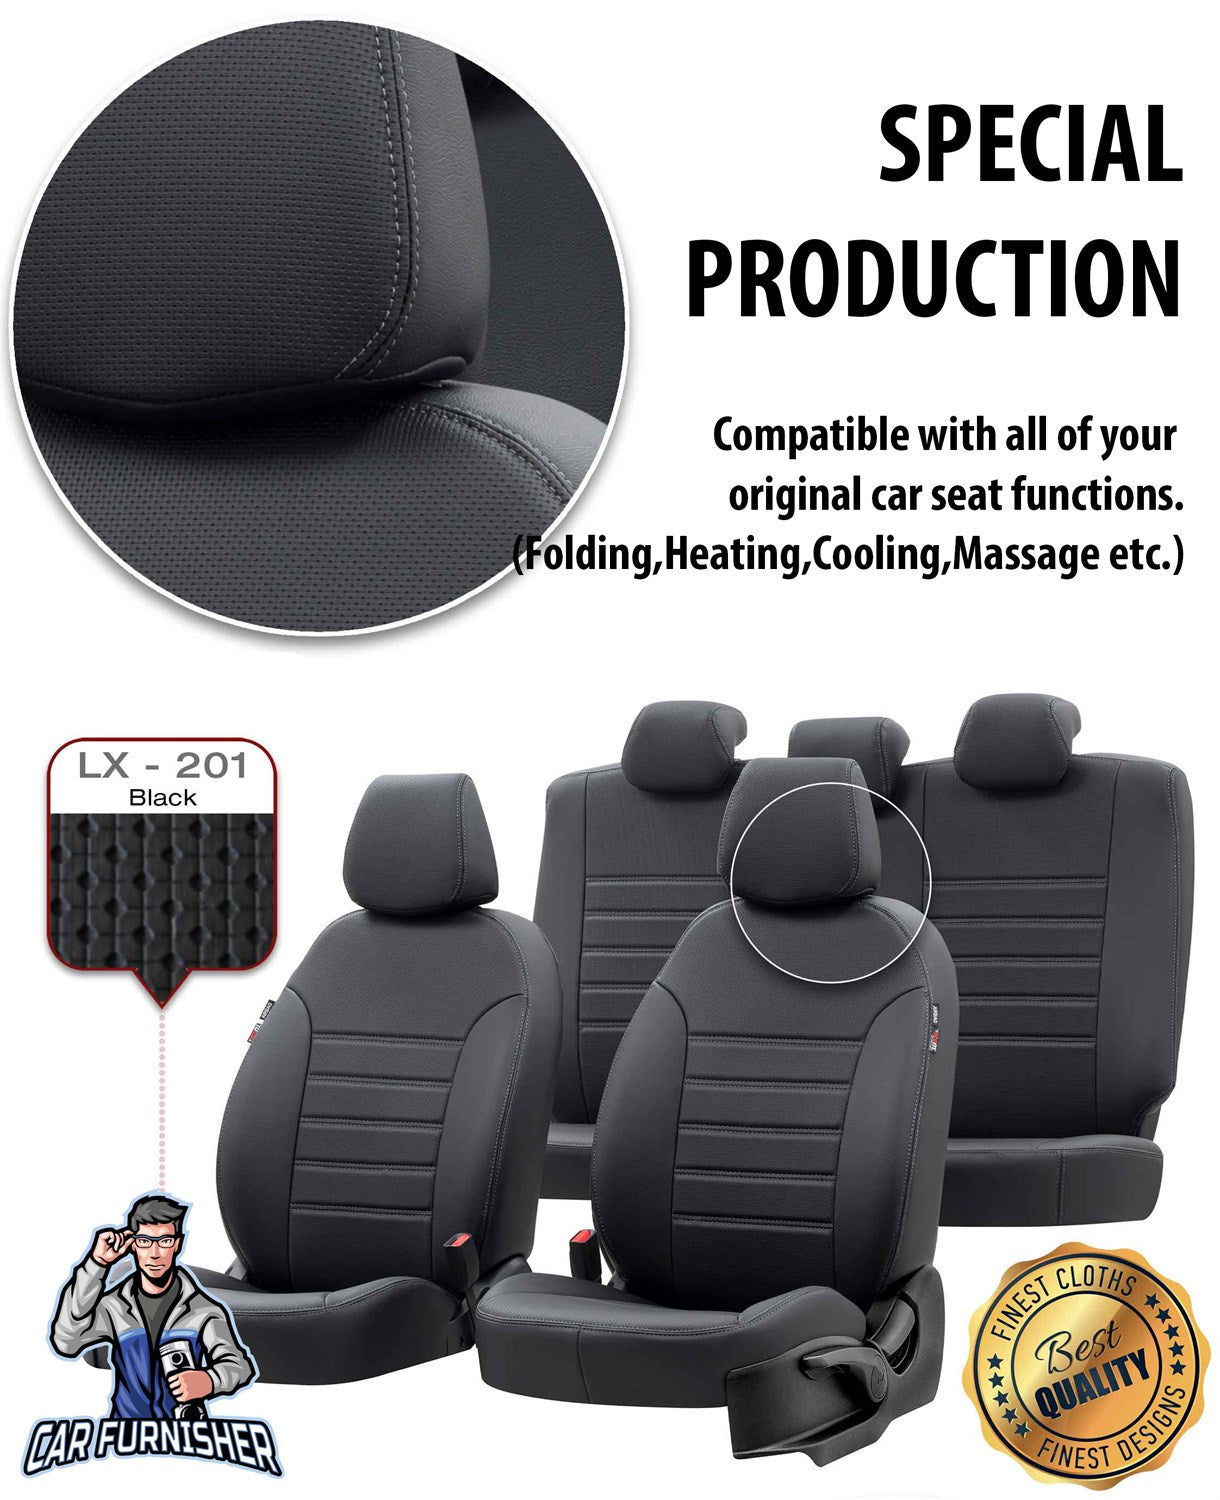 Volkswagen Sharan Seat Cover New York Leather Design Smoked Leather